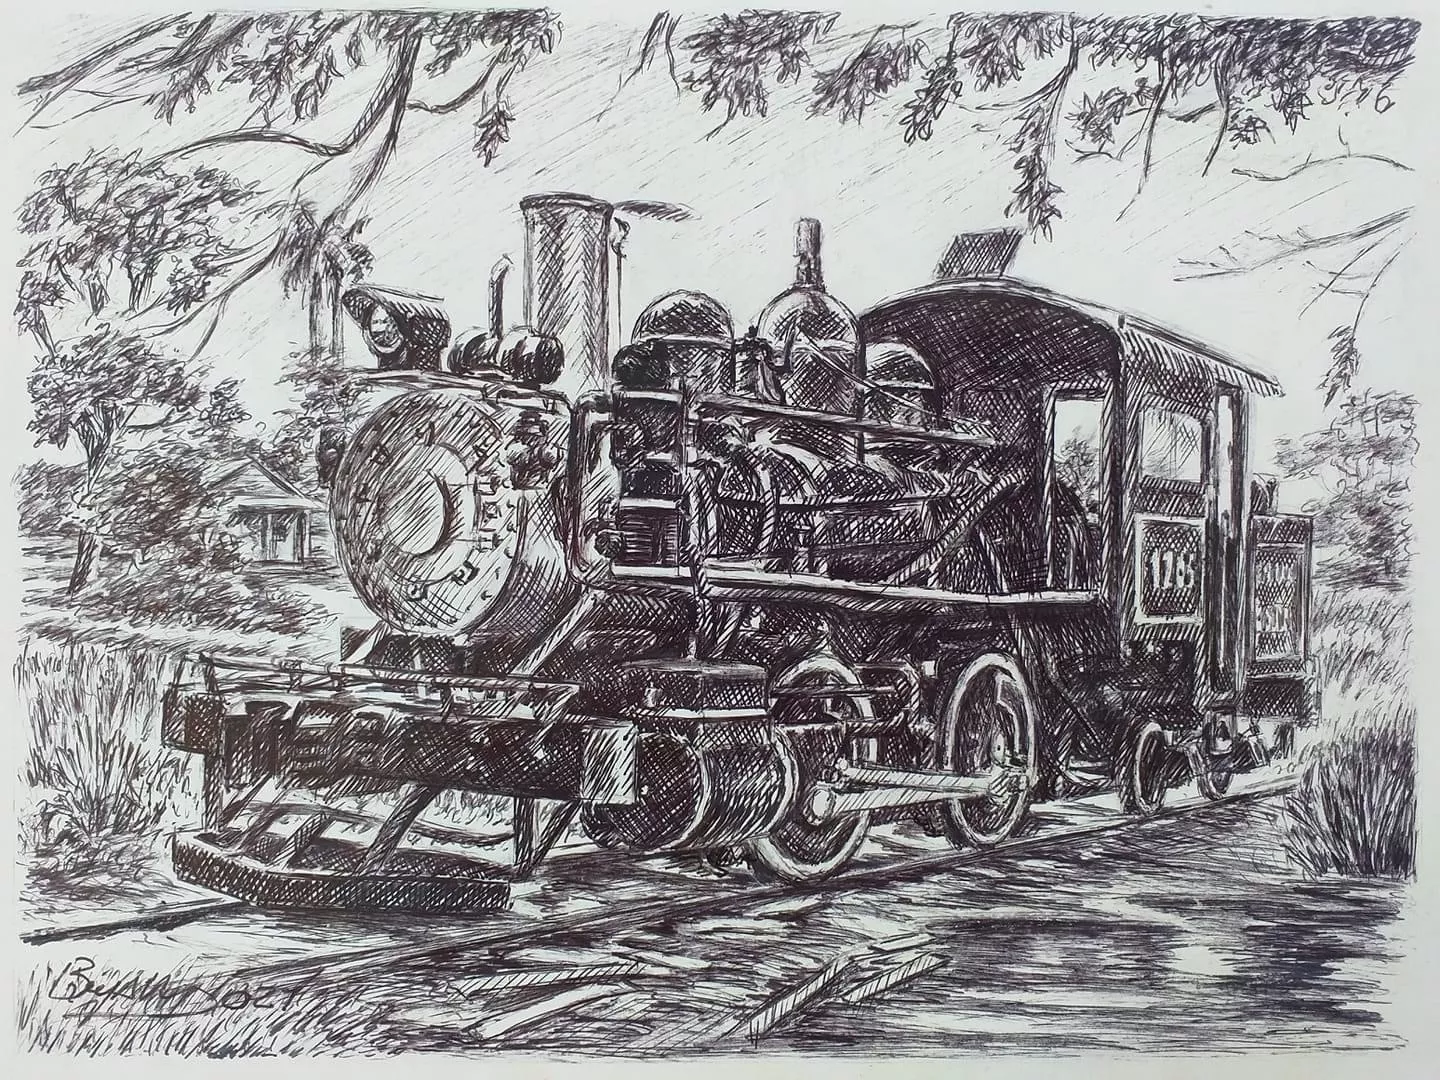 Bryan Estevez Train Collection, 2022  Drafting and pencil  A black and white pencil drawing of a detailed steam engine train. The artist describes the work as an expression of his passion for trains and life.